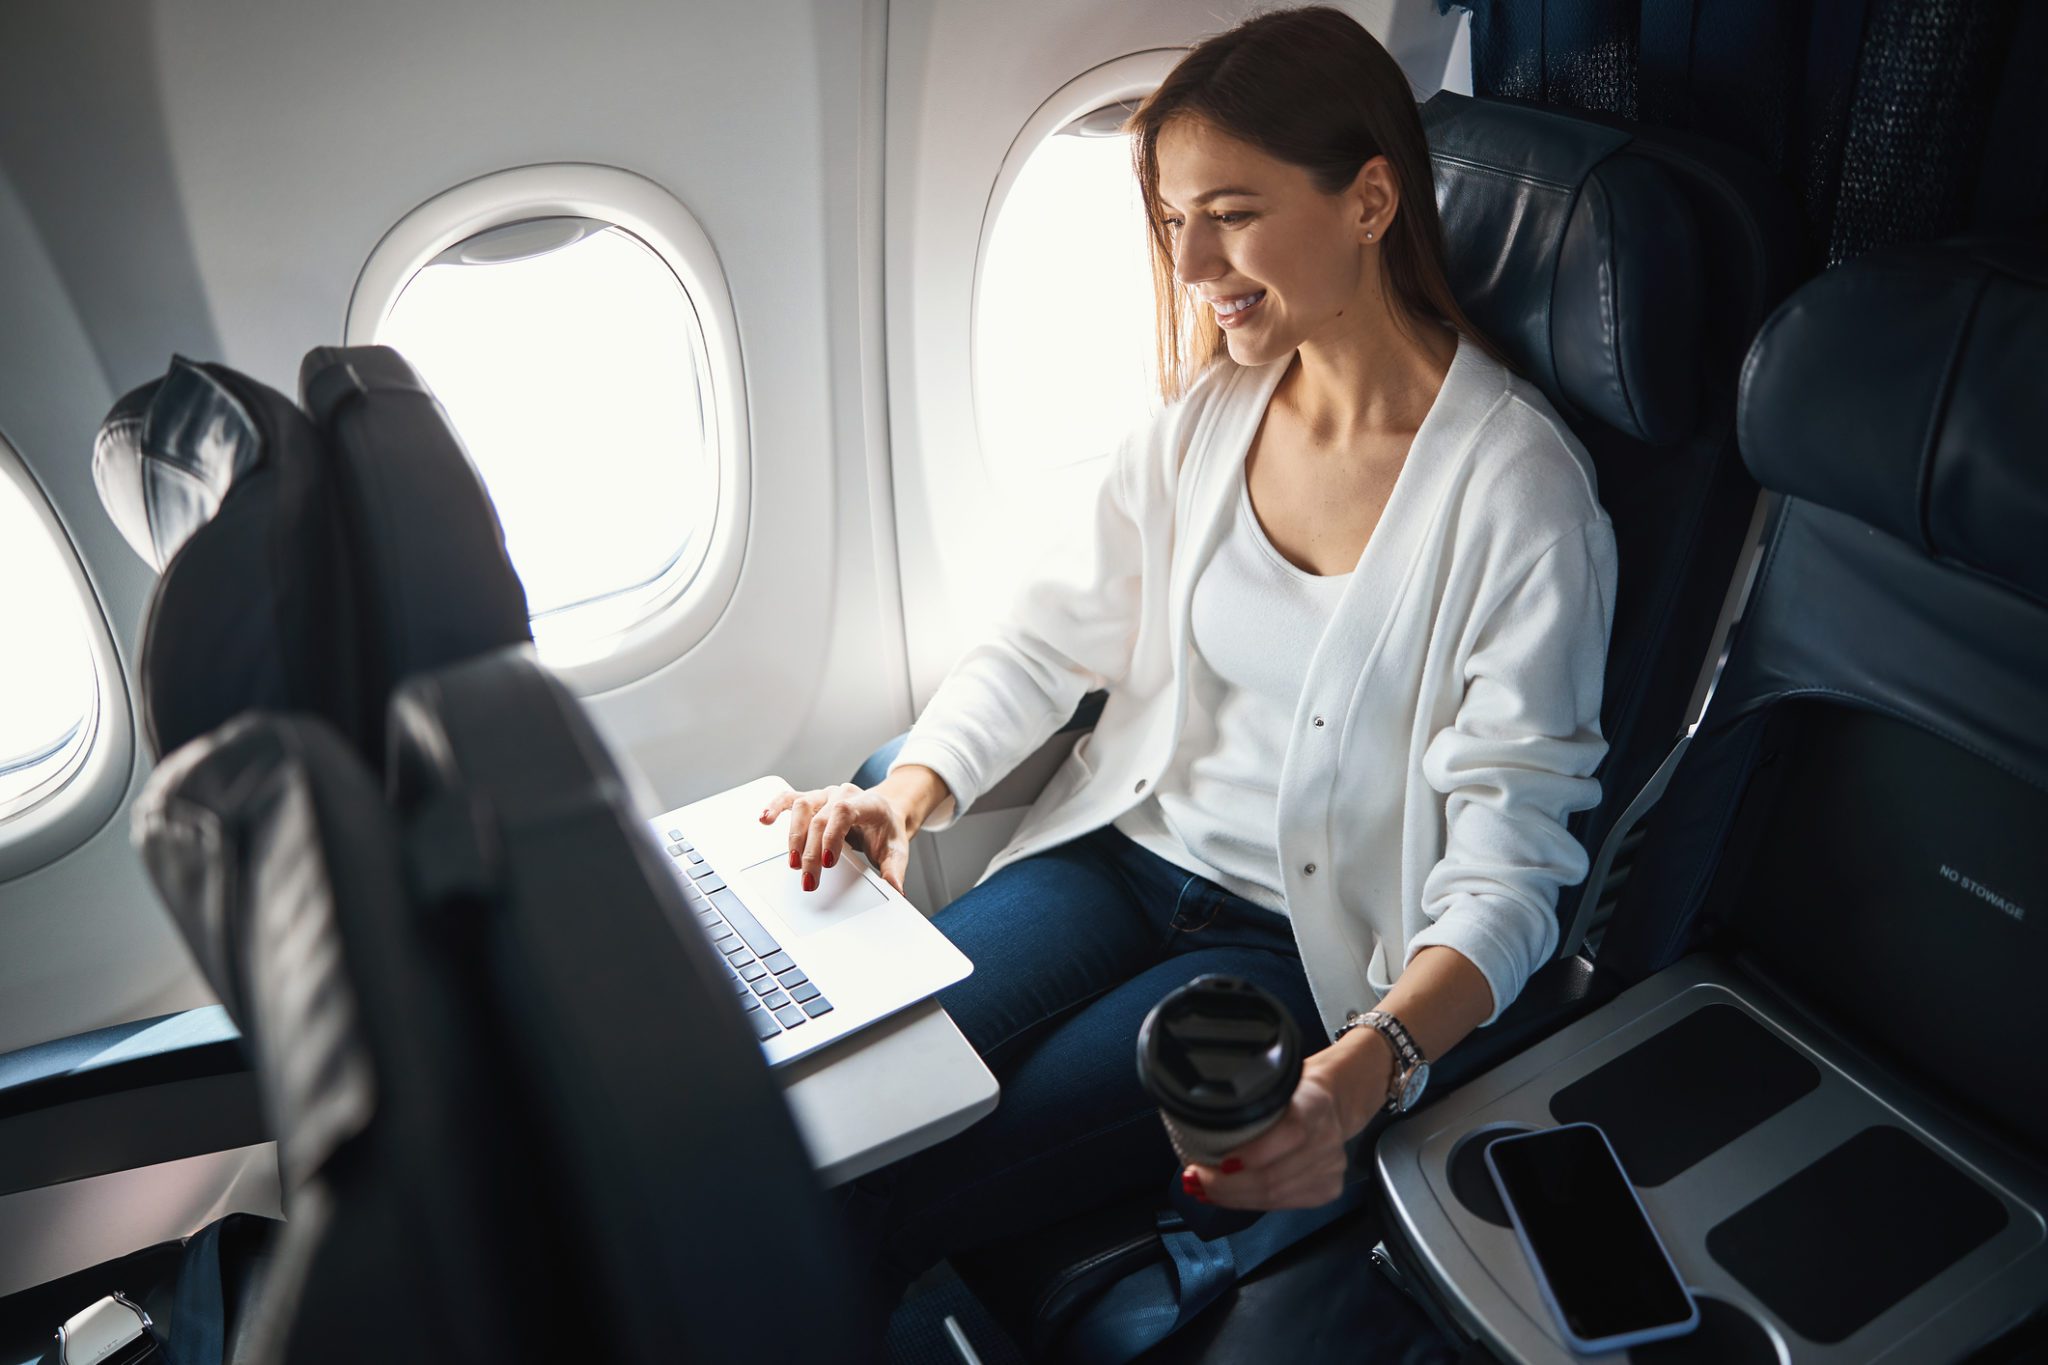 https://www.internationalcitizens.com/wp-content/uploads/2011/05/woman-sitting-in-window-seat-on-an-airplane-scaled.jpg